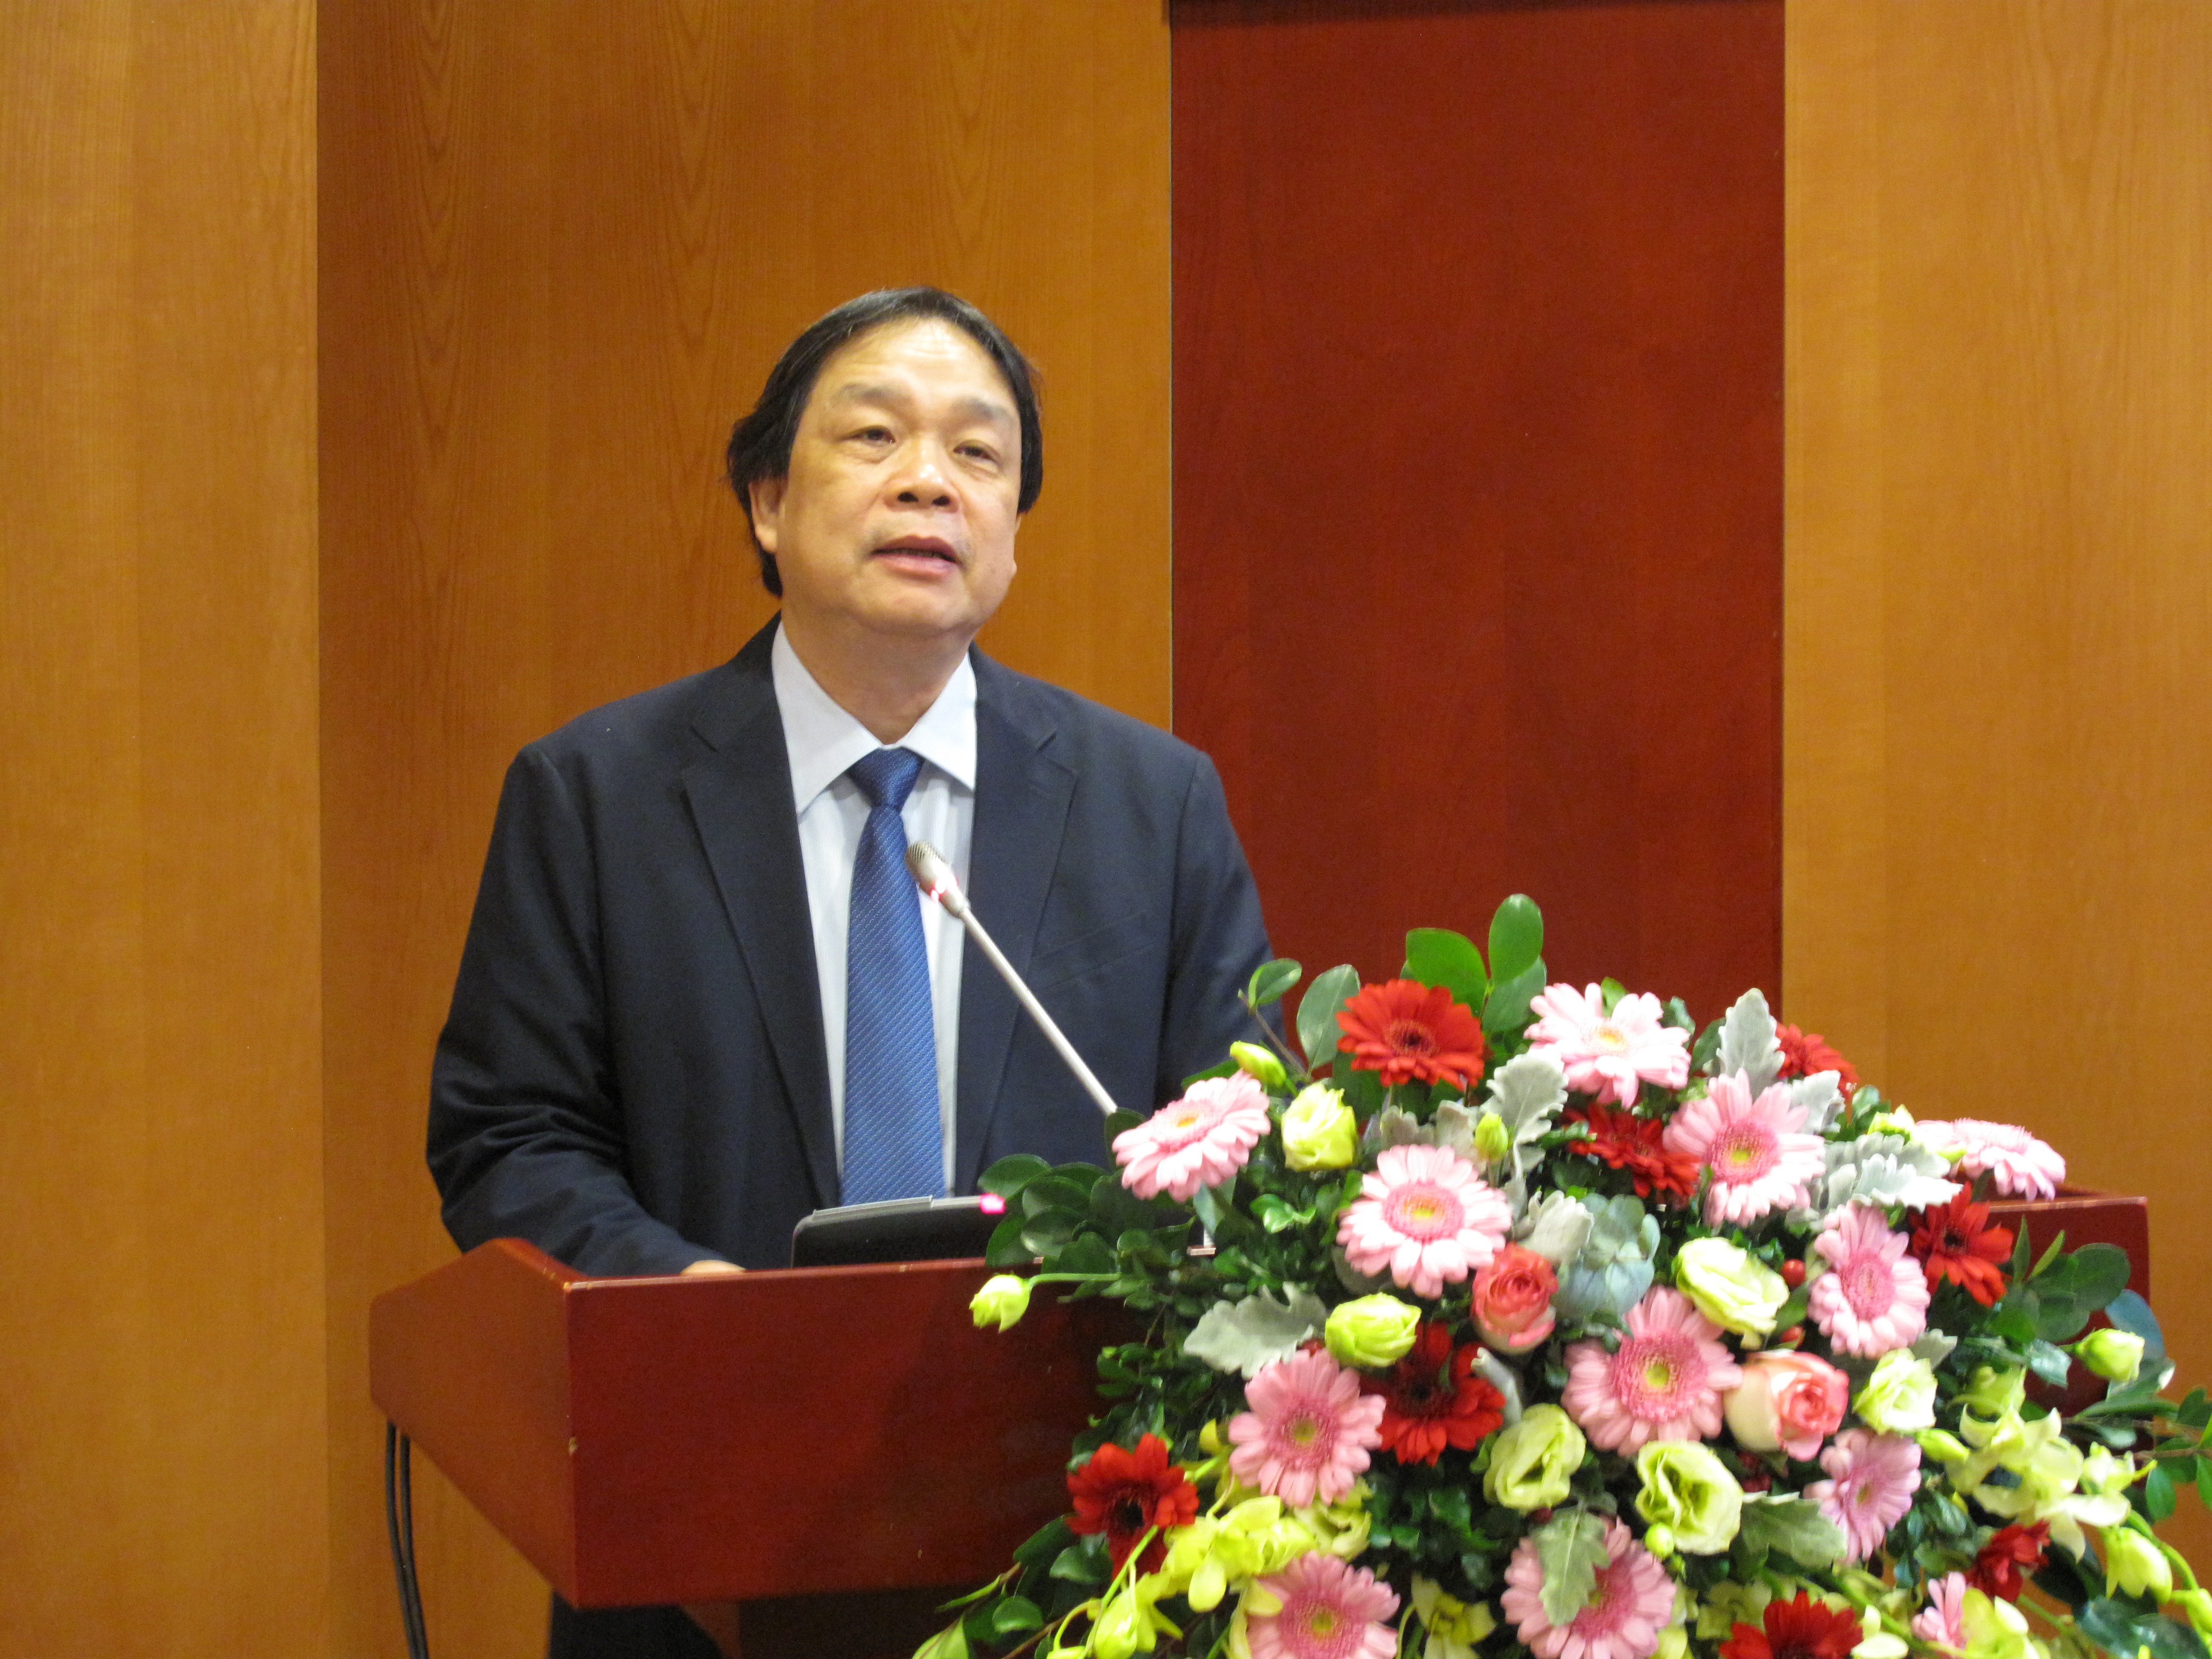 Prof. Dr. Dang Nguyen Anh, Vice President of Vietnam Academy of Social Sciences, Vice Chairman of Vietnam National Committee for UNESCO - Head of the Sub-Committee on Social Sciences, speaking at the opening of the Workshop